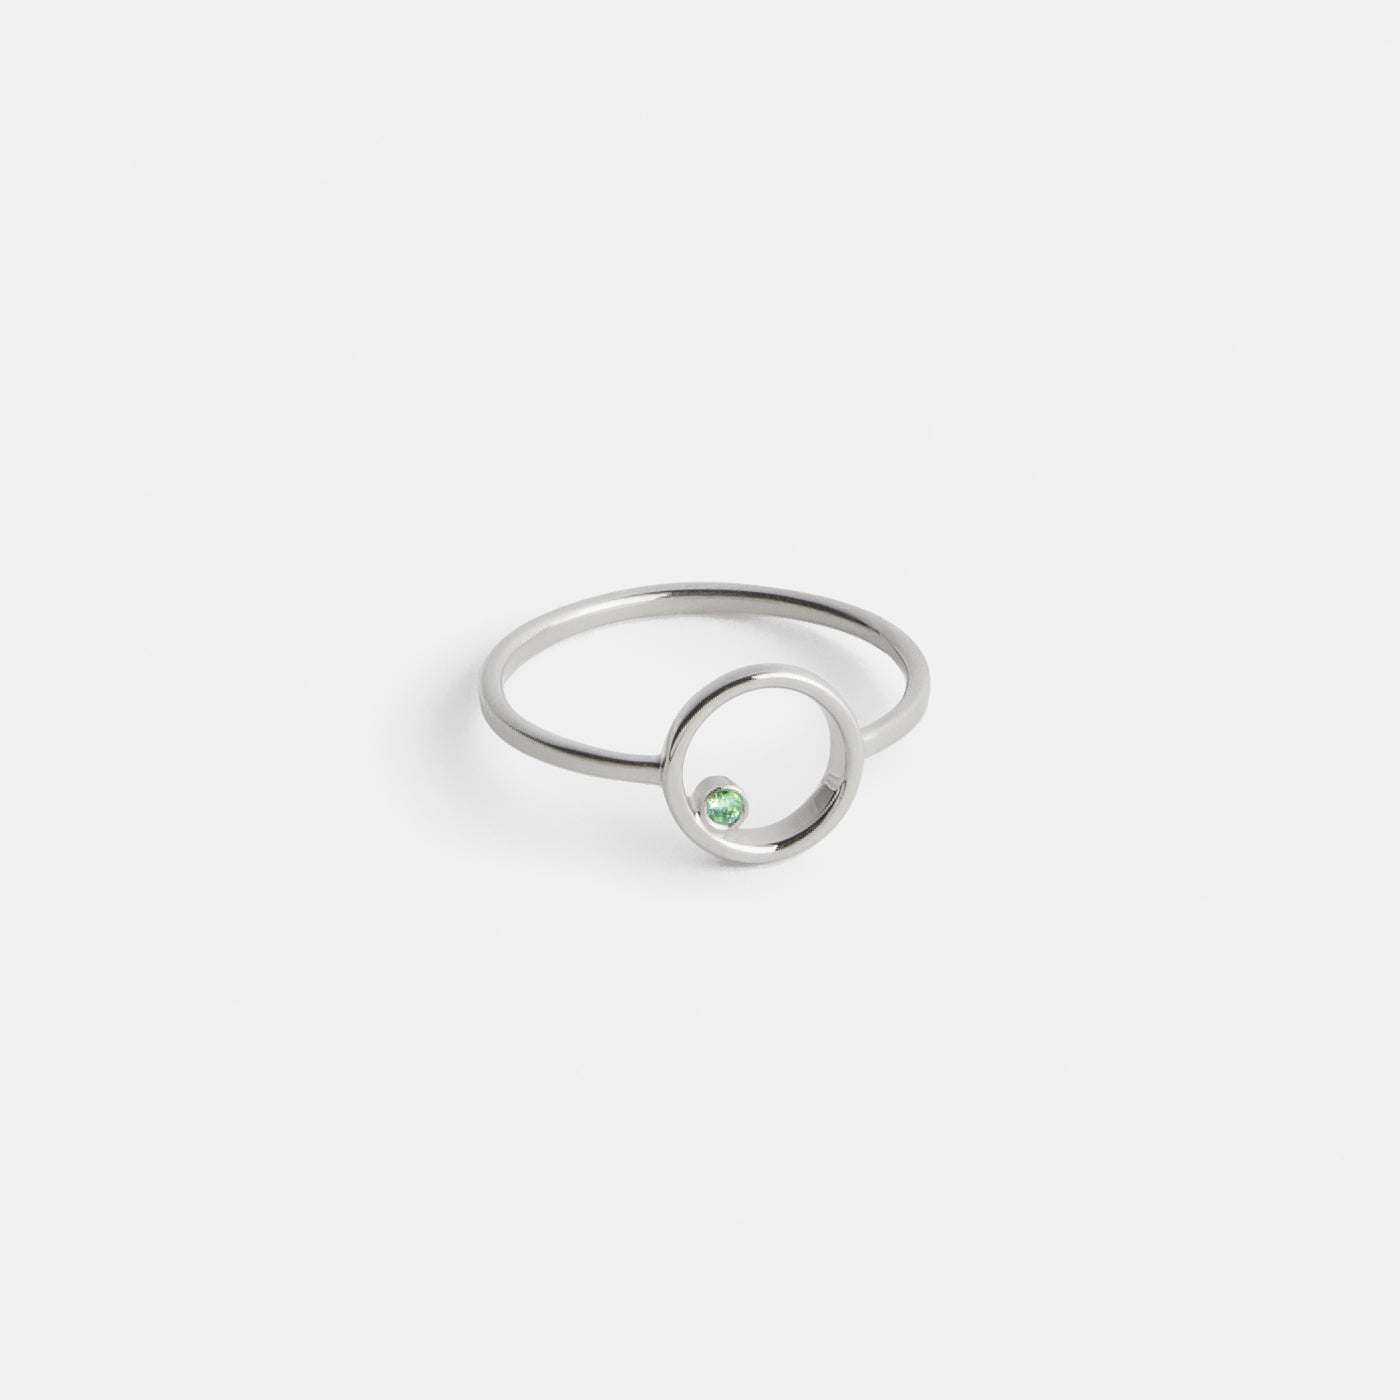 Ila Unique Ring in 14k White Gold set with Green Diamond by SHW Fine Jewelry New York City